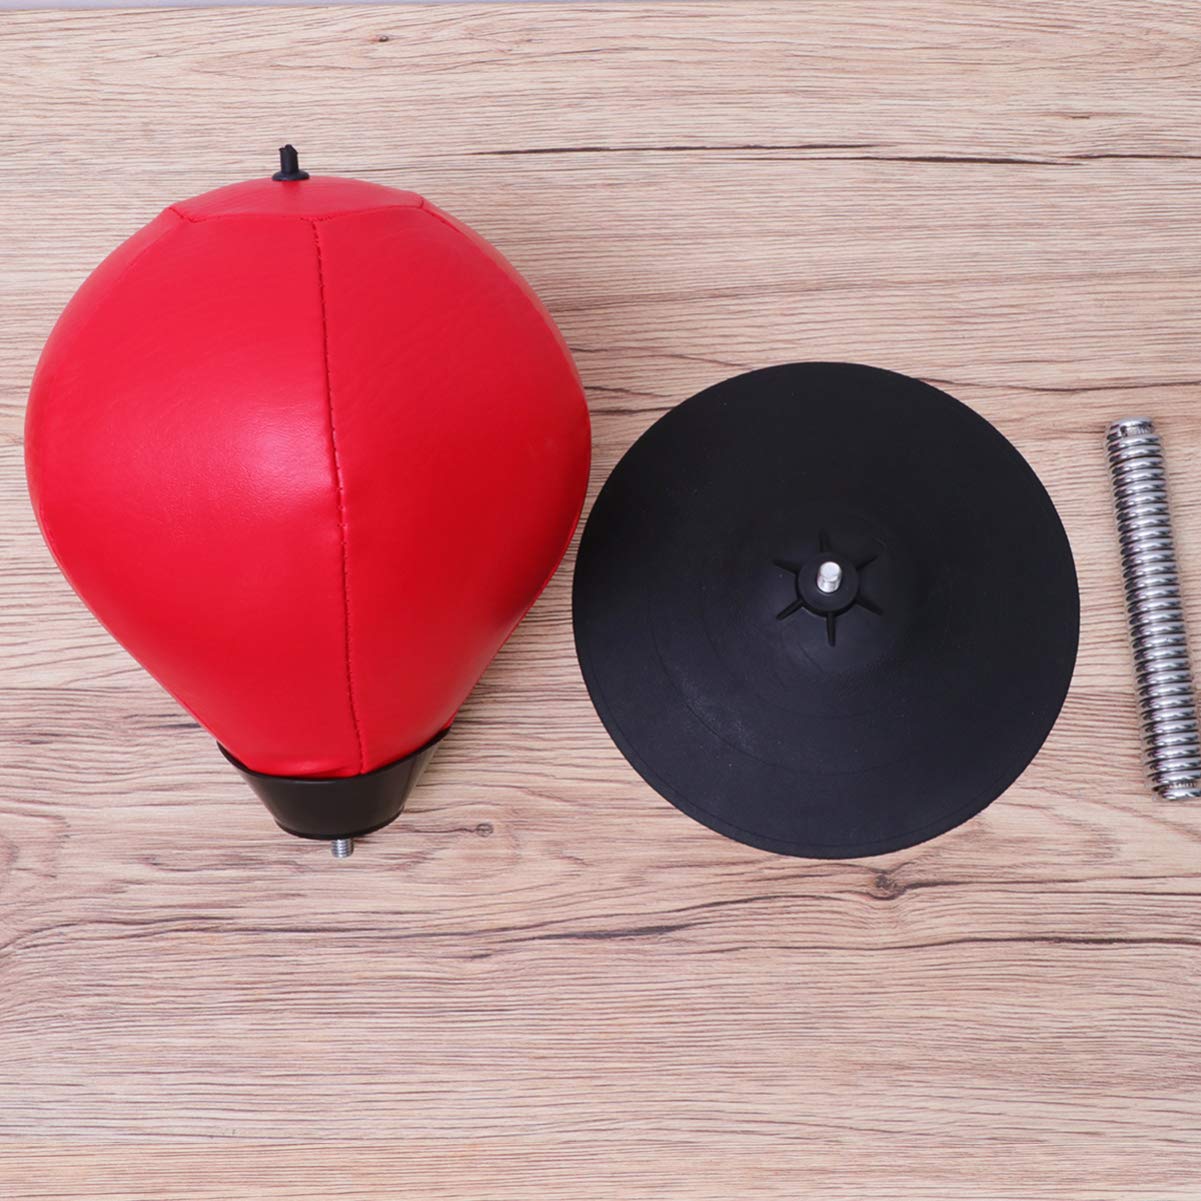 LIOOBO 1 PC Desktop Punching Bag Stress Relief Punching Ball with Strong Suction Base Kids Boxing Bag for School Home Office